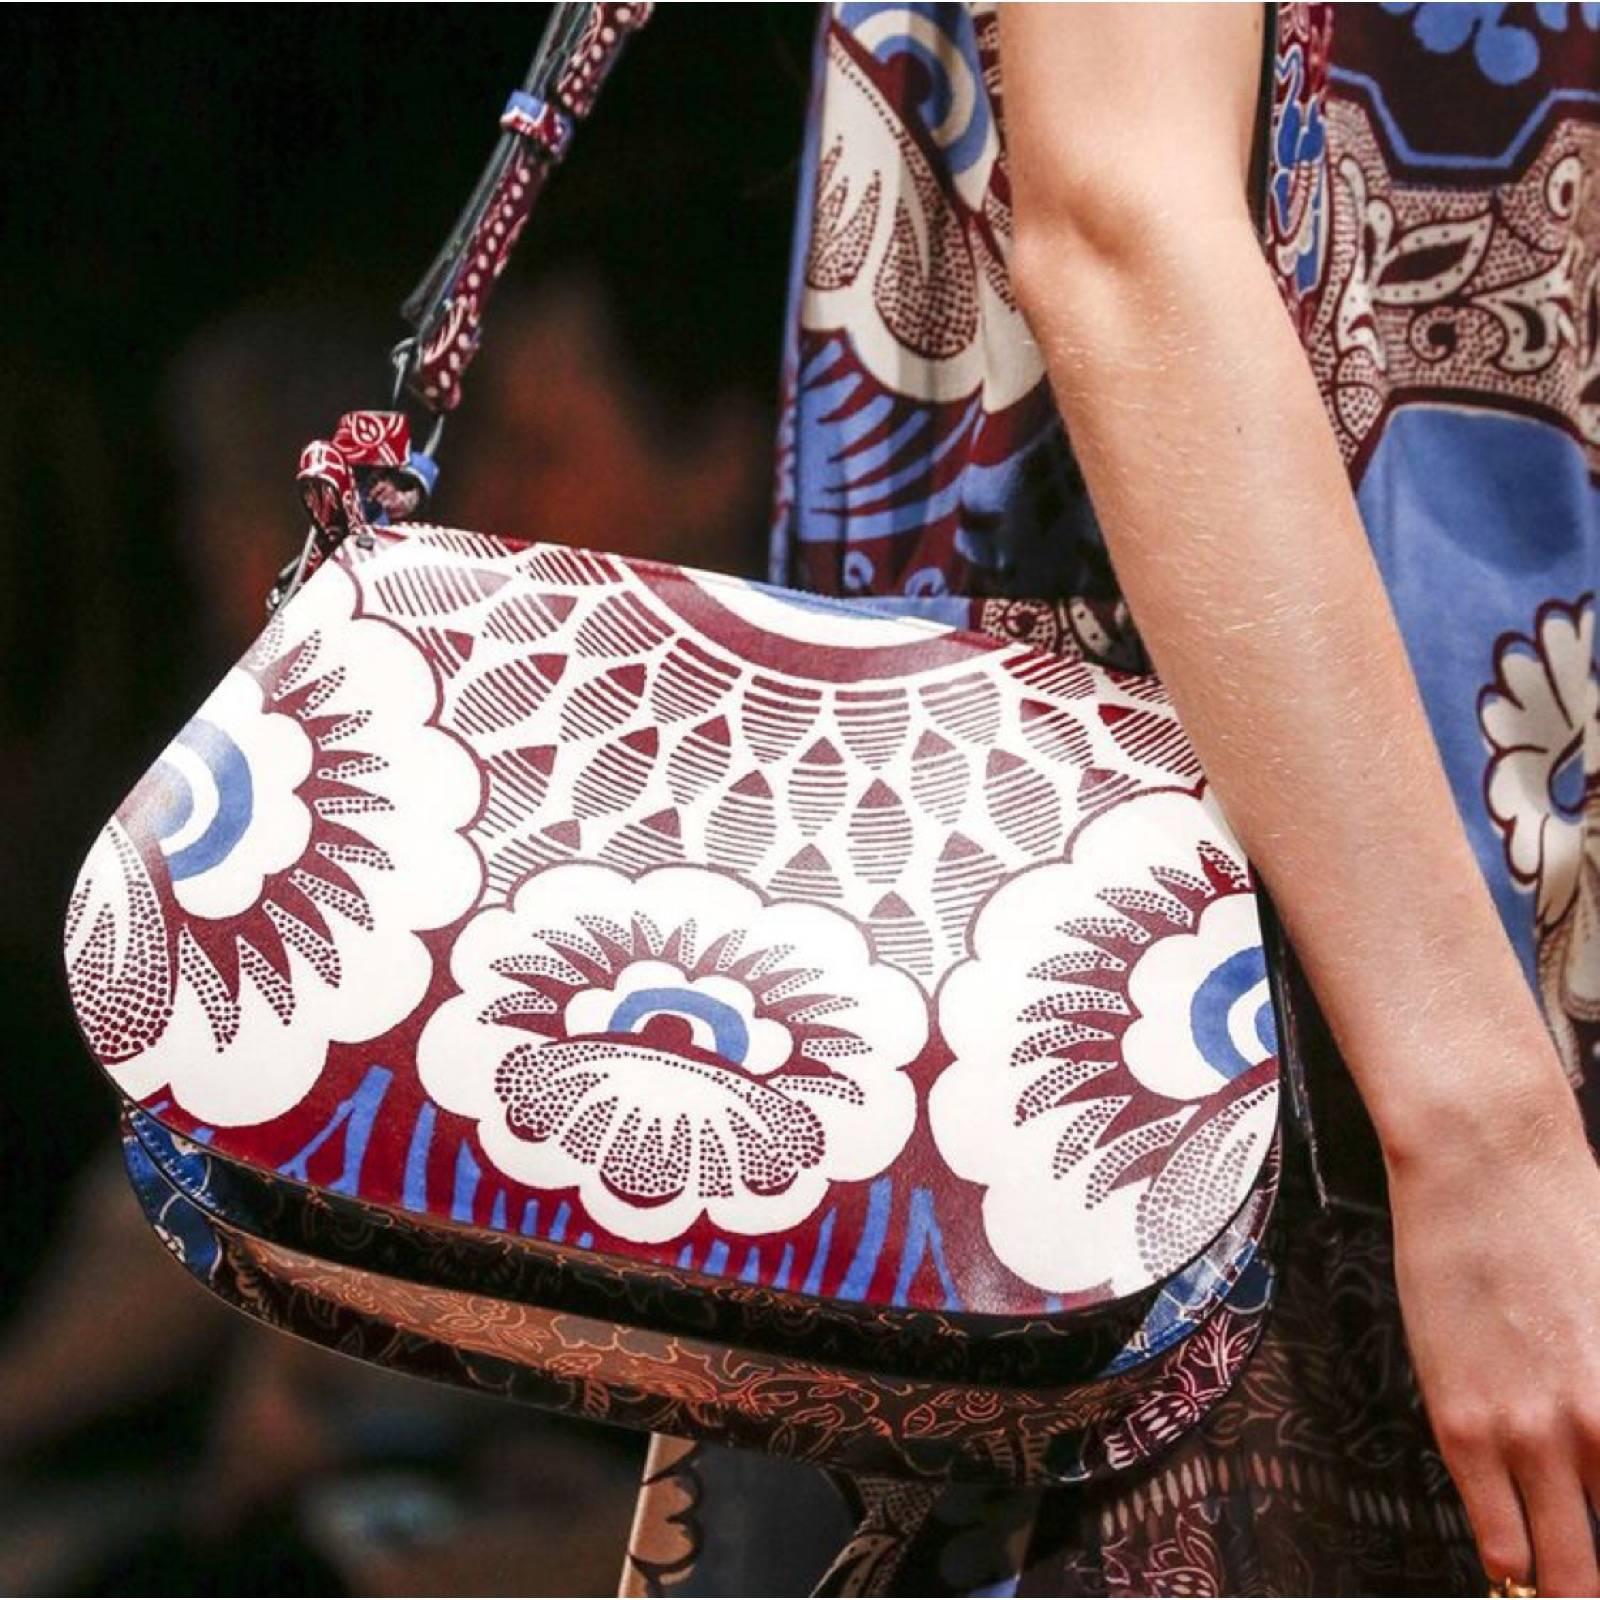 Feeling floral? This shoulder bag, which took a turn down the runway in Valentino’s 2015 show, combines the beauty of Southeast Asia with Italian leather design. The floral print, which uses an earthy palette of burgundy, blue, and cream, draws